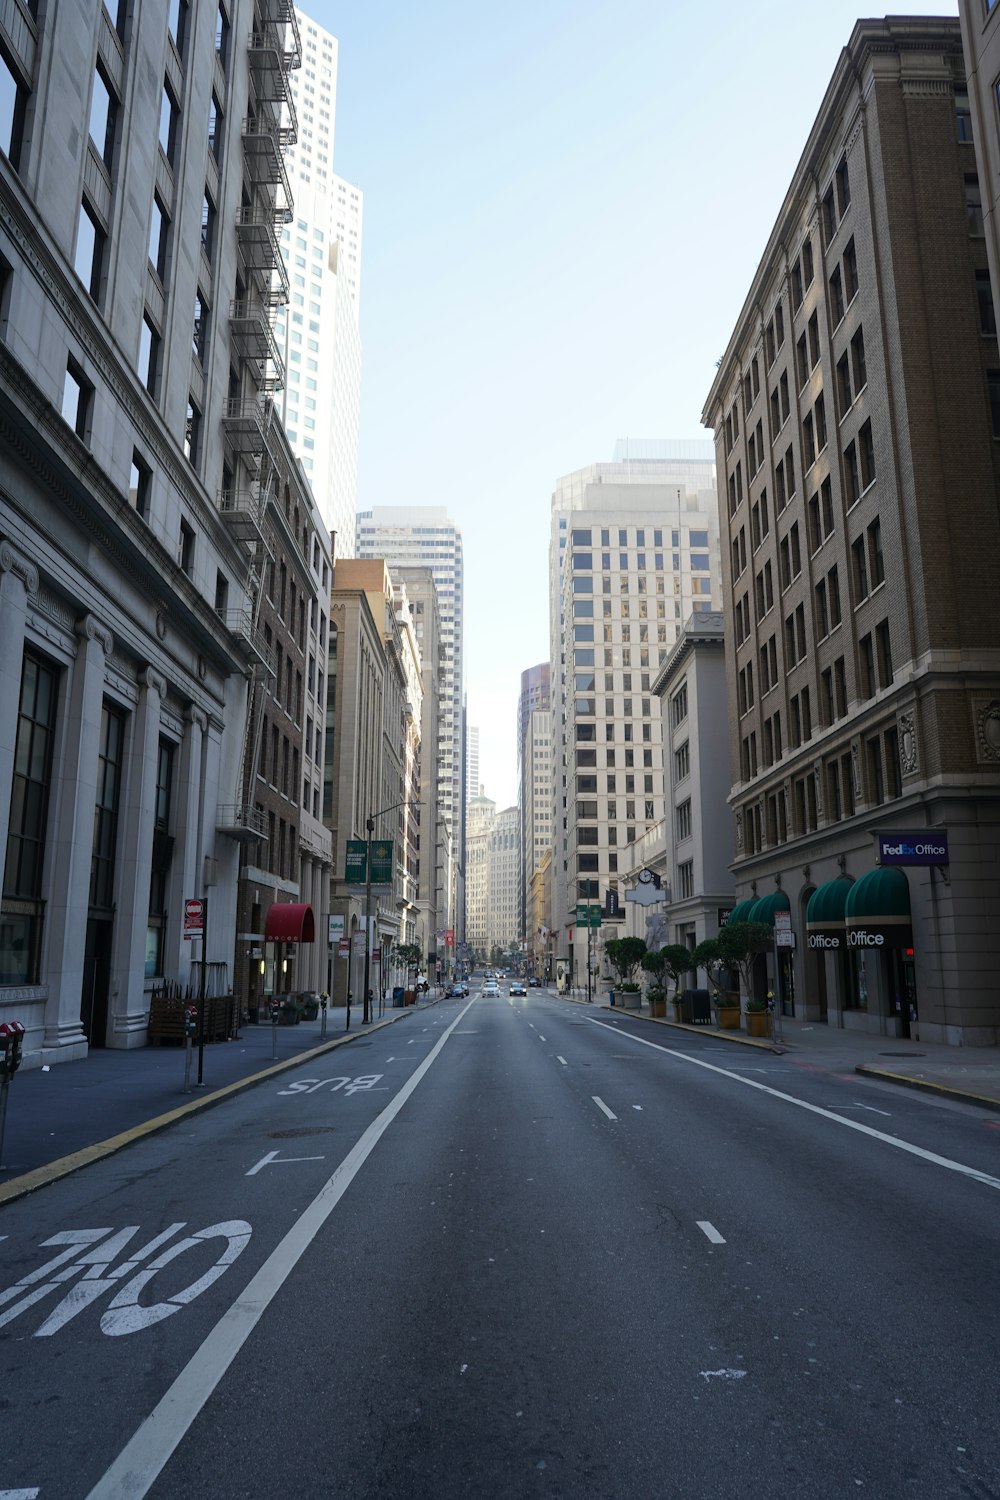 an empty street in a city with tall buildings